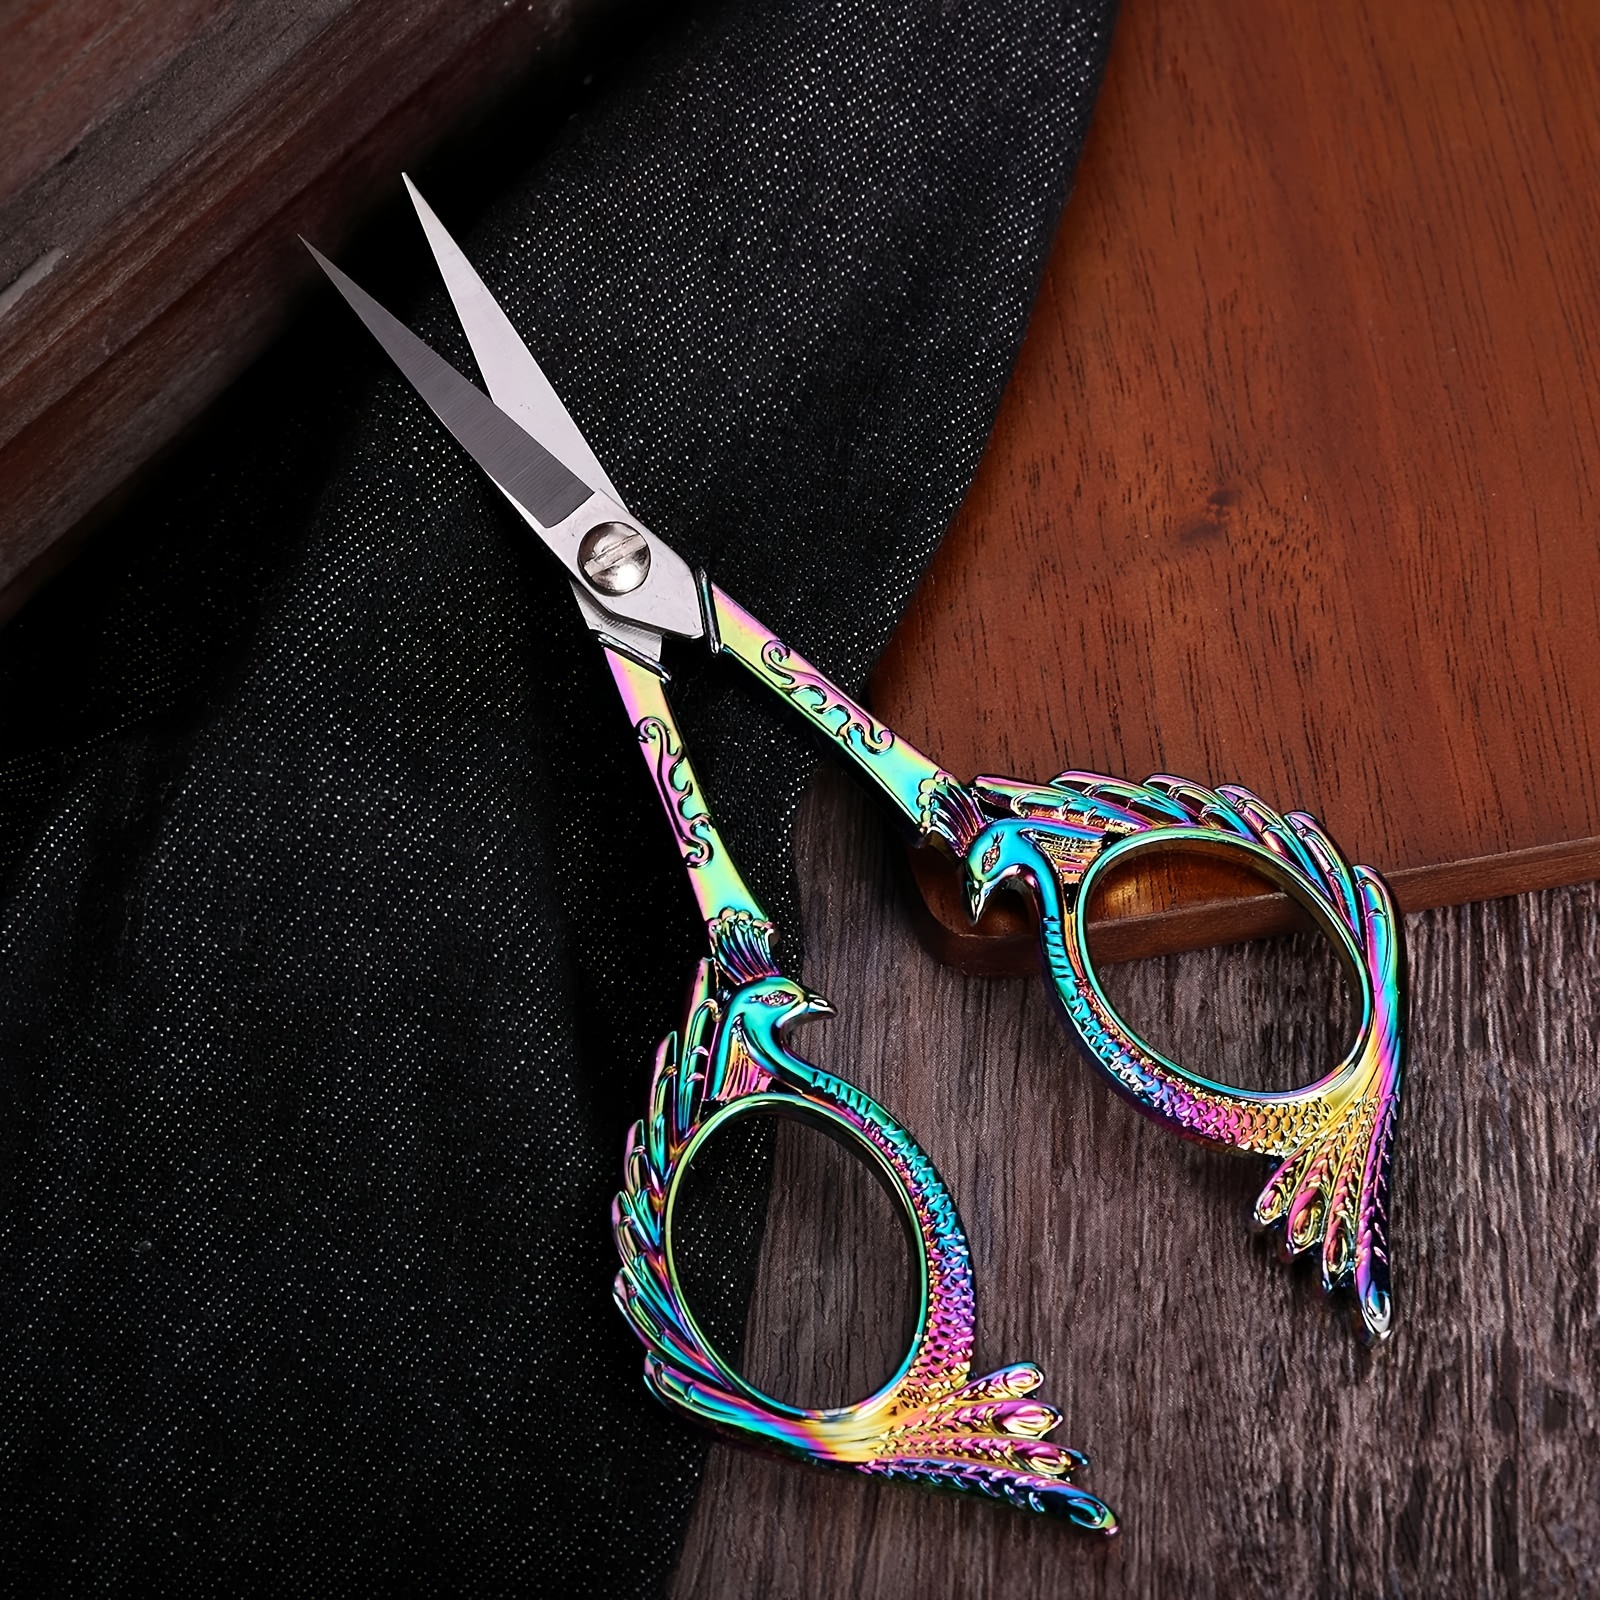 Stainless Steel Sharp Tip Small Scissors All Purpose for Crafting Art Work  Threading Needlework Cutting Tools, Stork Embroidery Scissors And Cross  Stitch Sewing Bird Small Tool Sewing Scissors (Sliver)